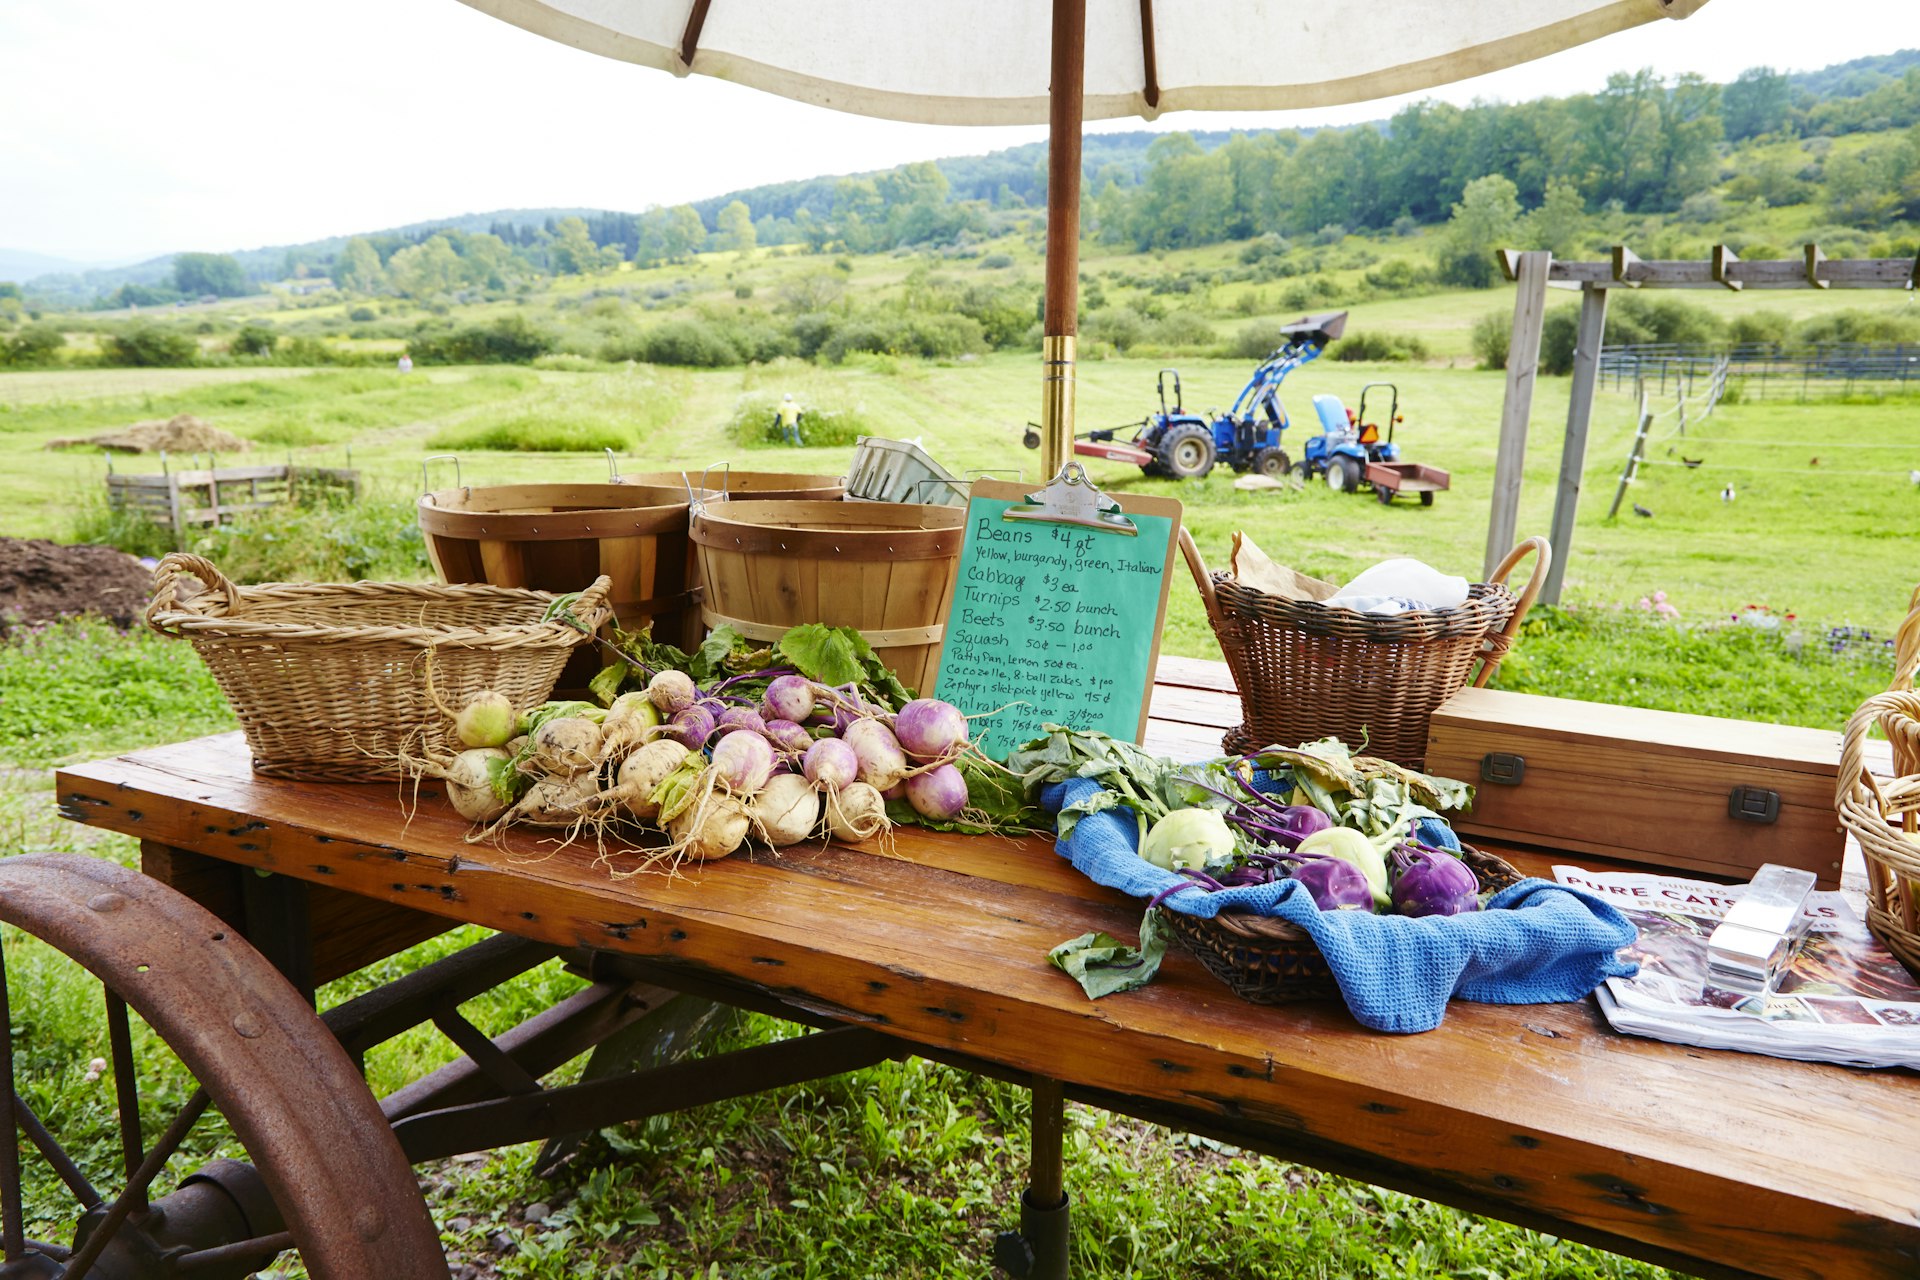 Vegetable produce at a Farmer Stand in Catskills